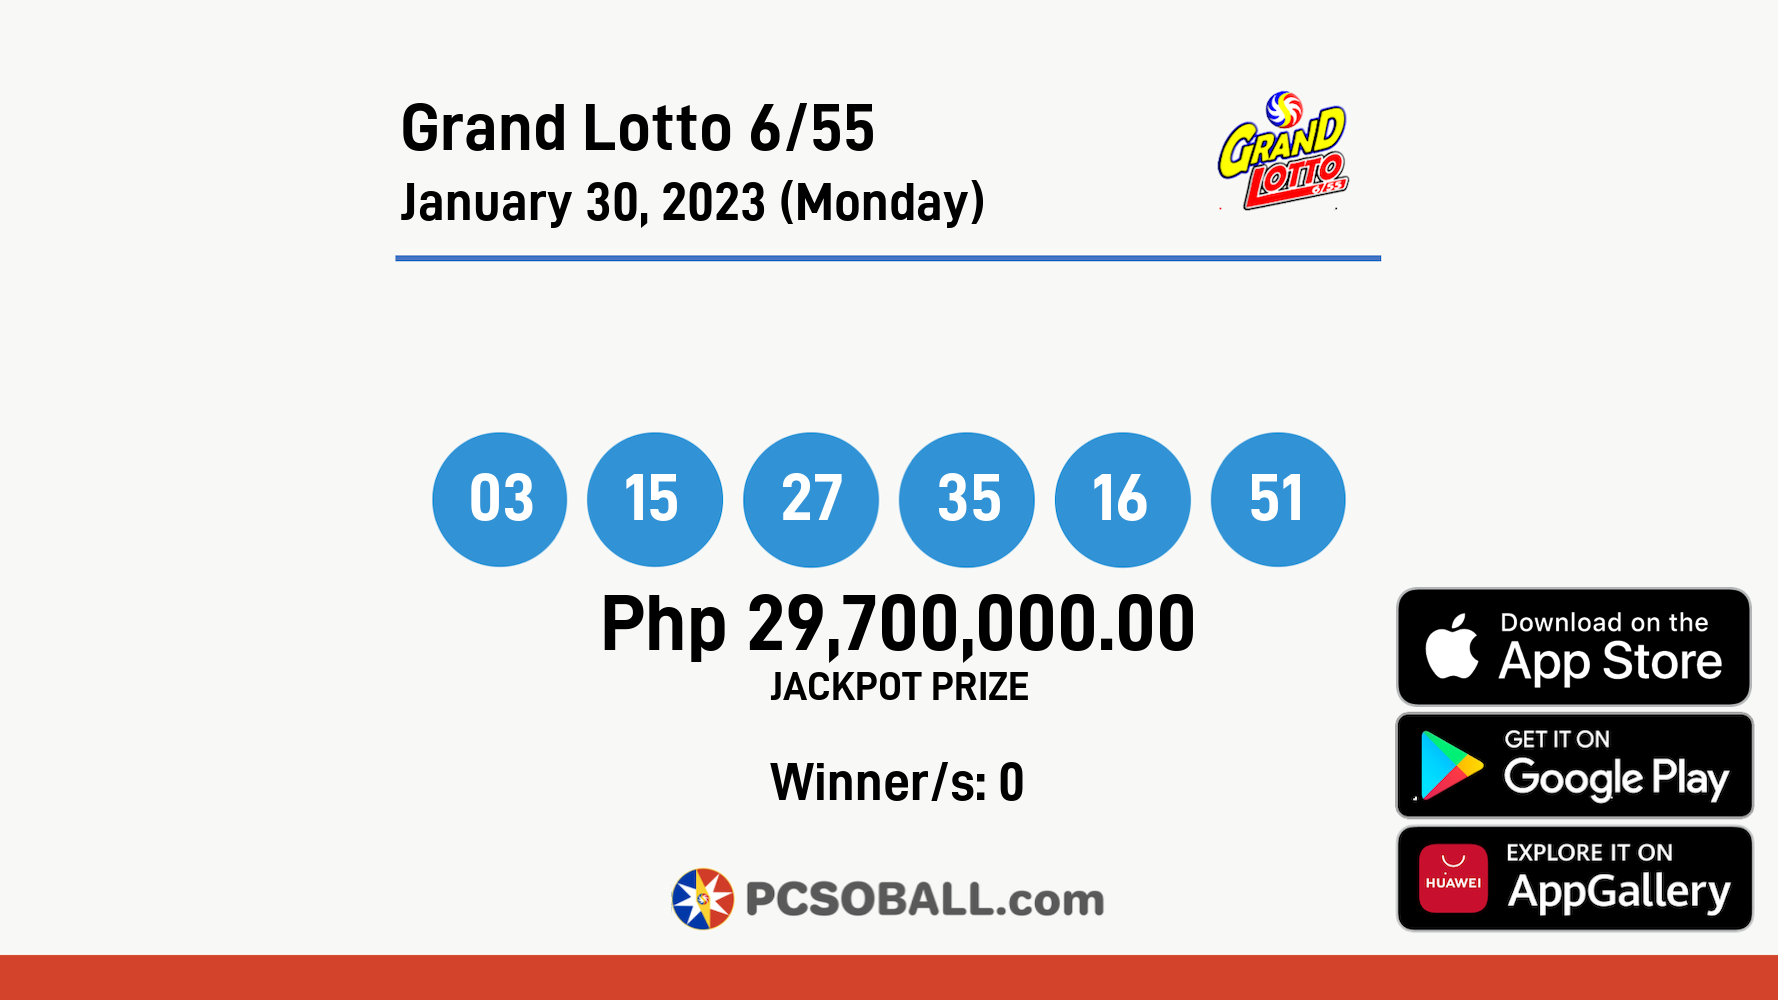 Grand Lotto 6/55 January 30, 2023 (Monday) Result